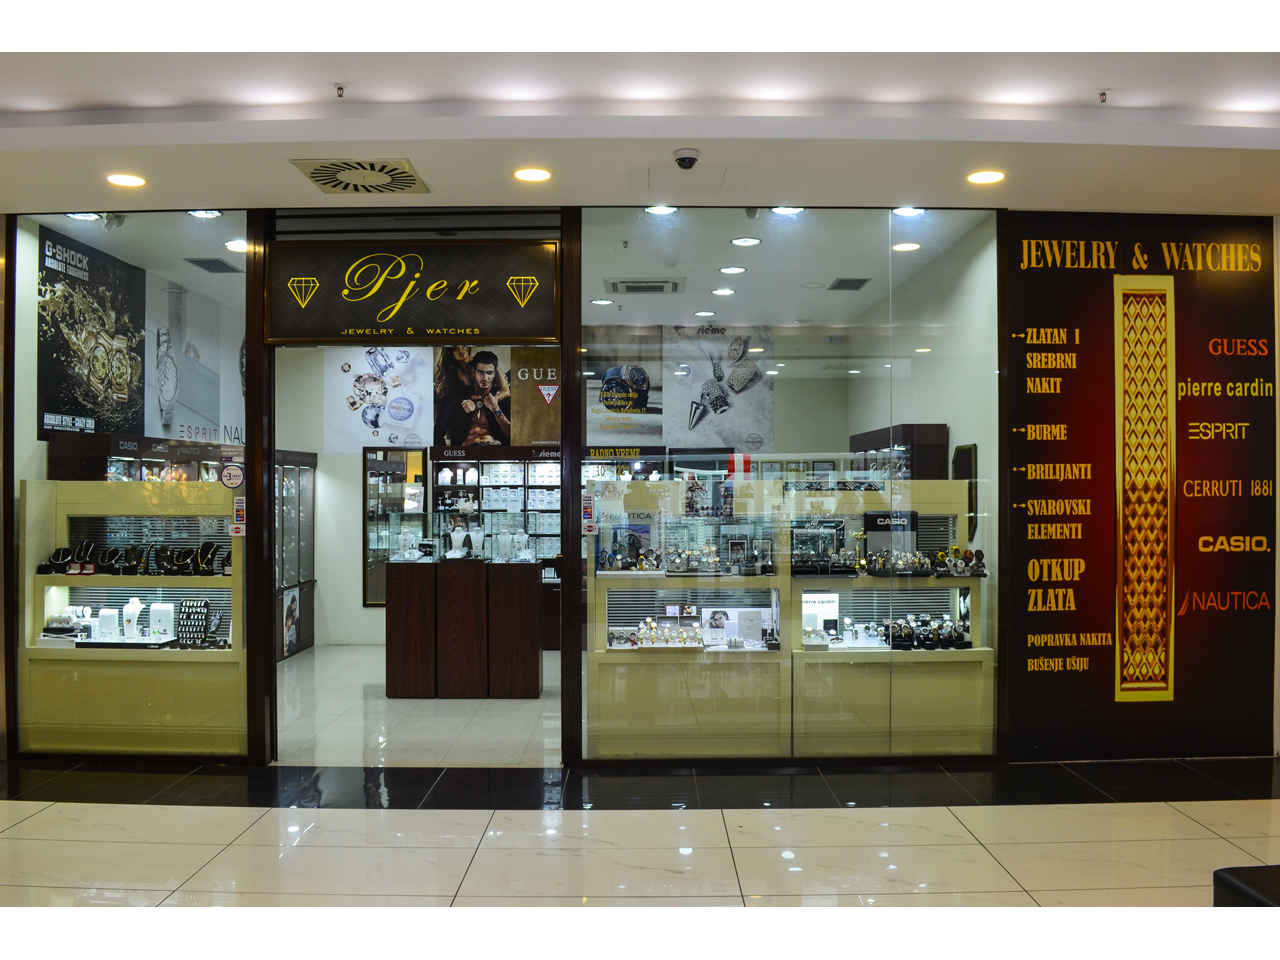 PJER JEWELLERY & WATCHES Zlatare Beograd